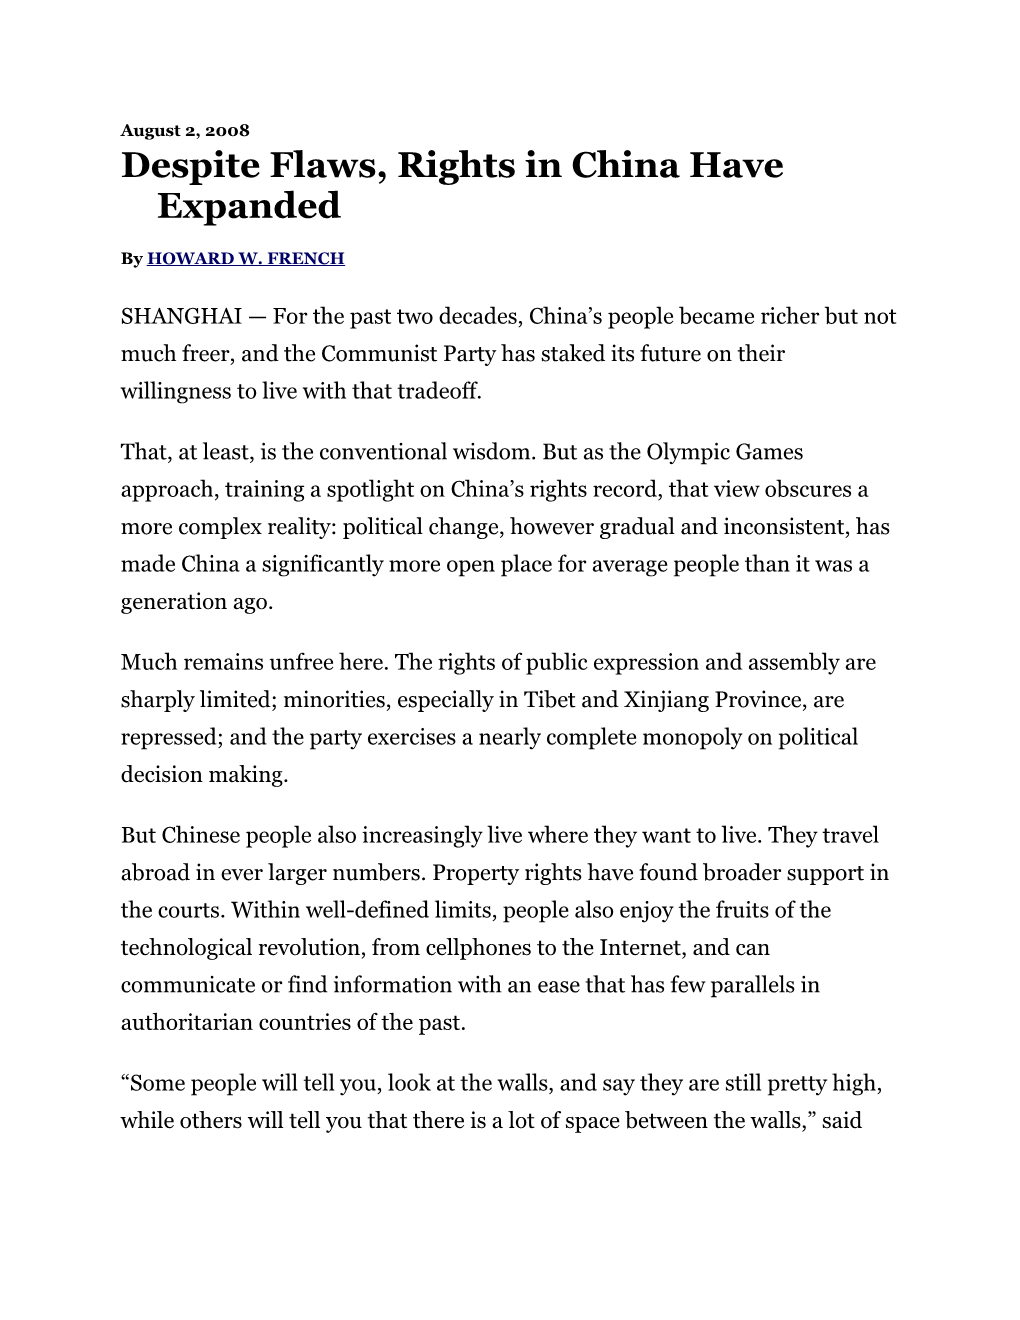 Despite Flaws, Rights in China Have Expanded